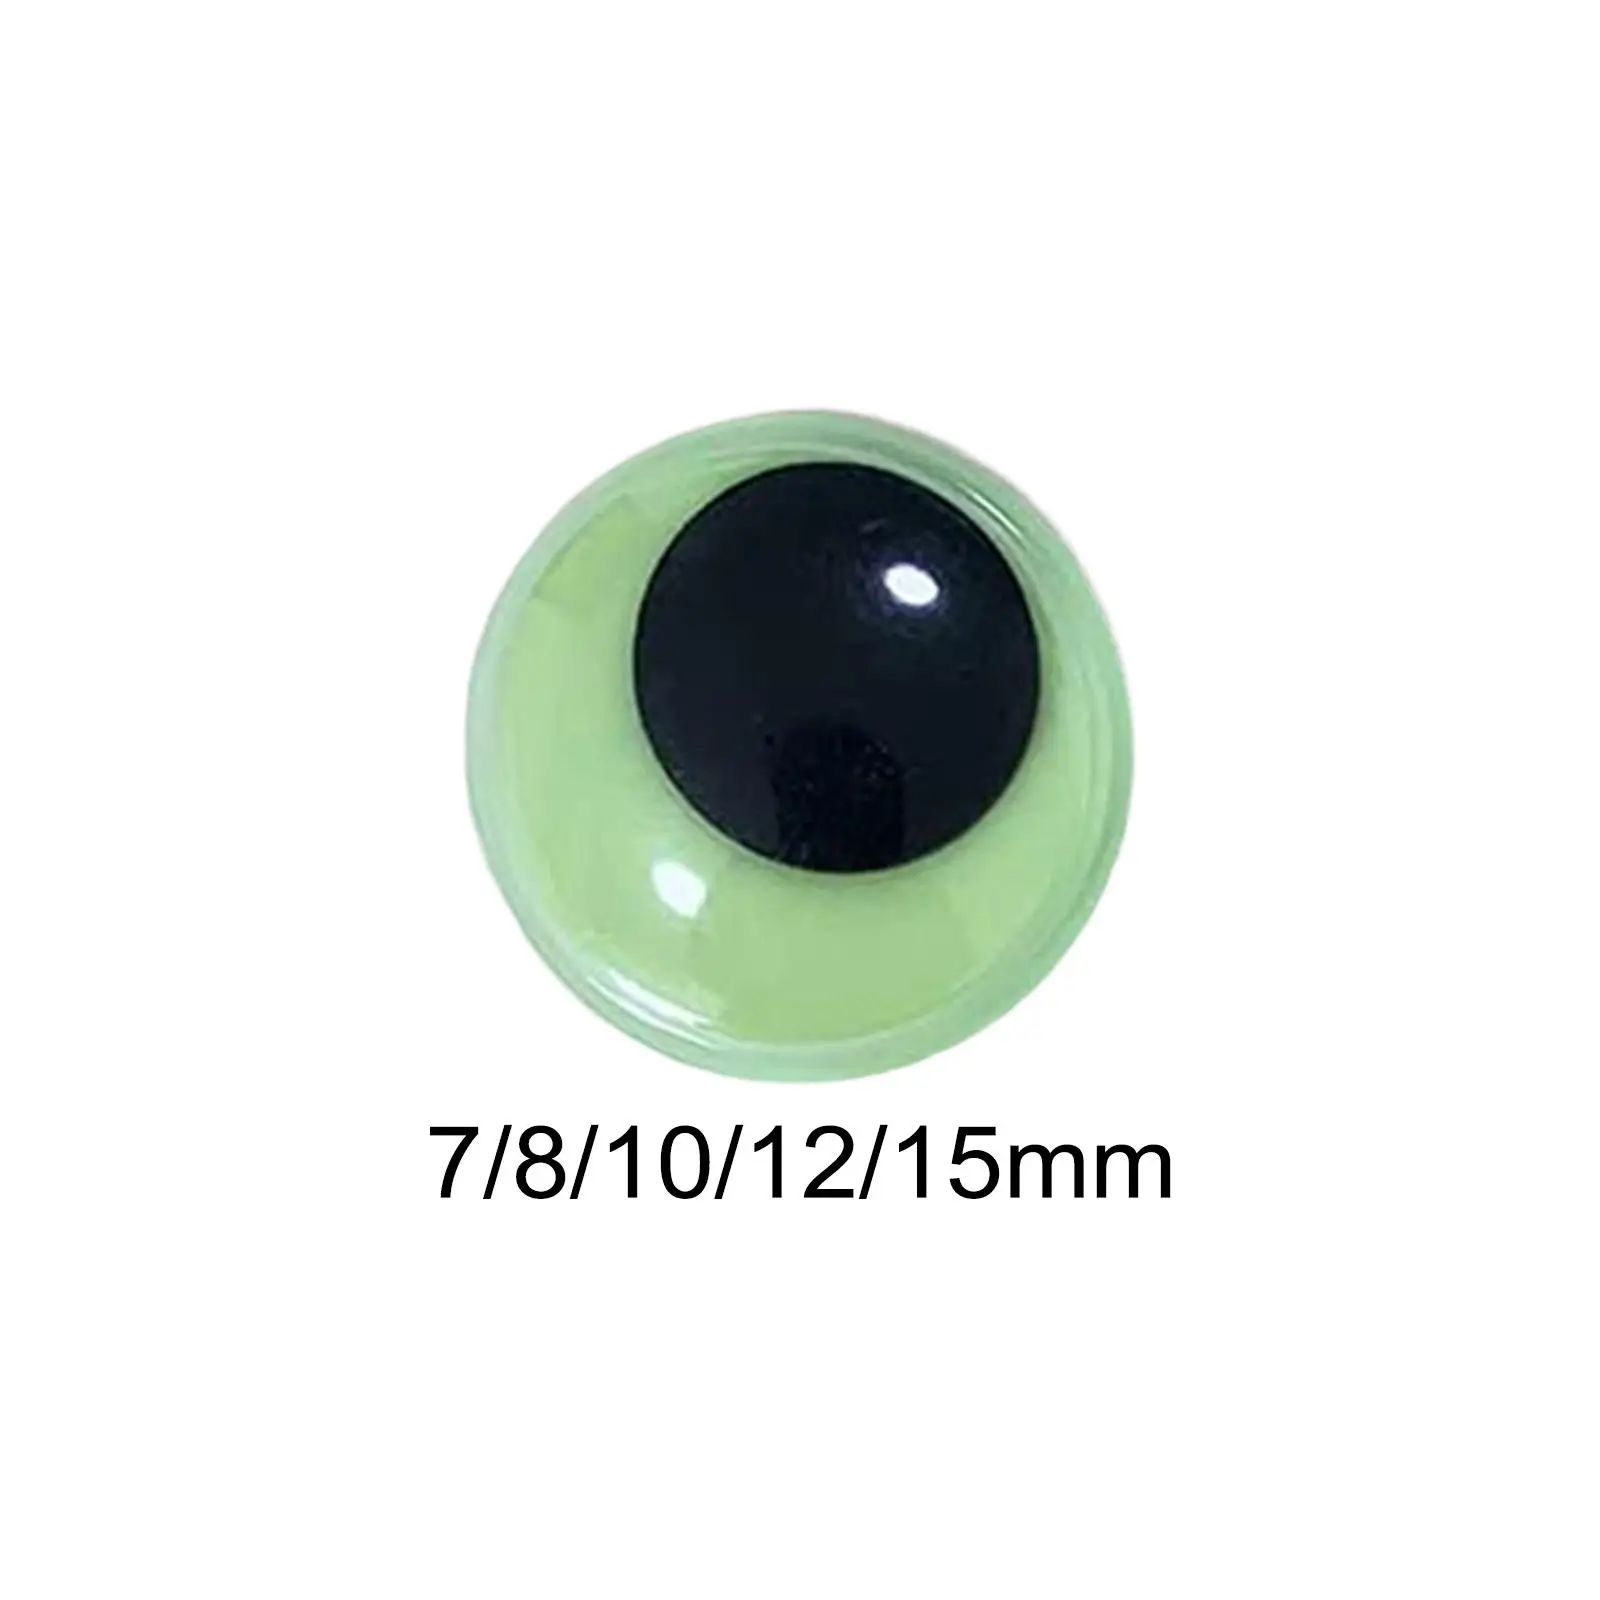 Glow in The Dark Eyes Round Stick on Sticky Movable Eyes Googly Eyes for Soft Toys Scrapbooking Crafts Decoration Halloween